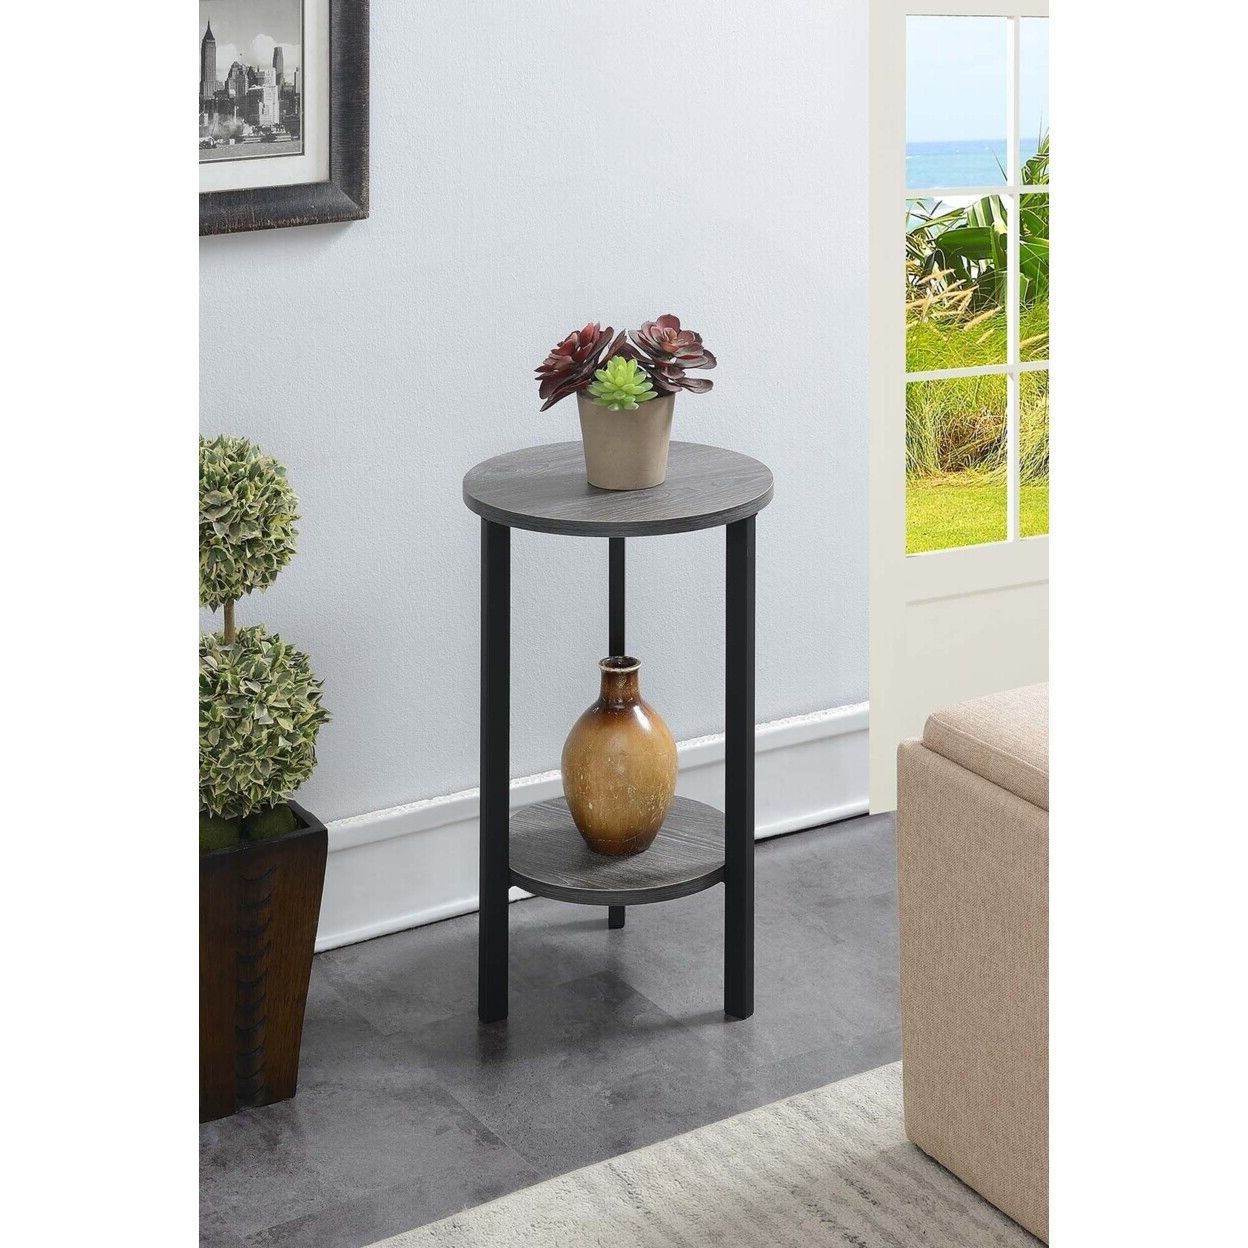 Ebay Within Best And Newest Weathered Gray Plant Stands (View 1 of 10)